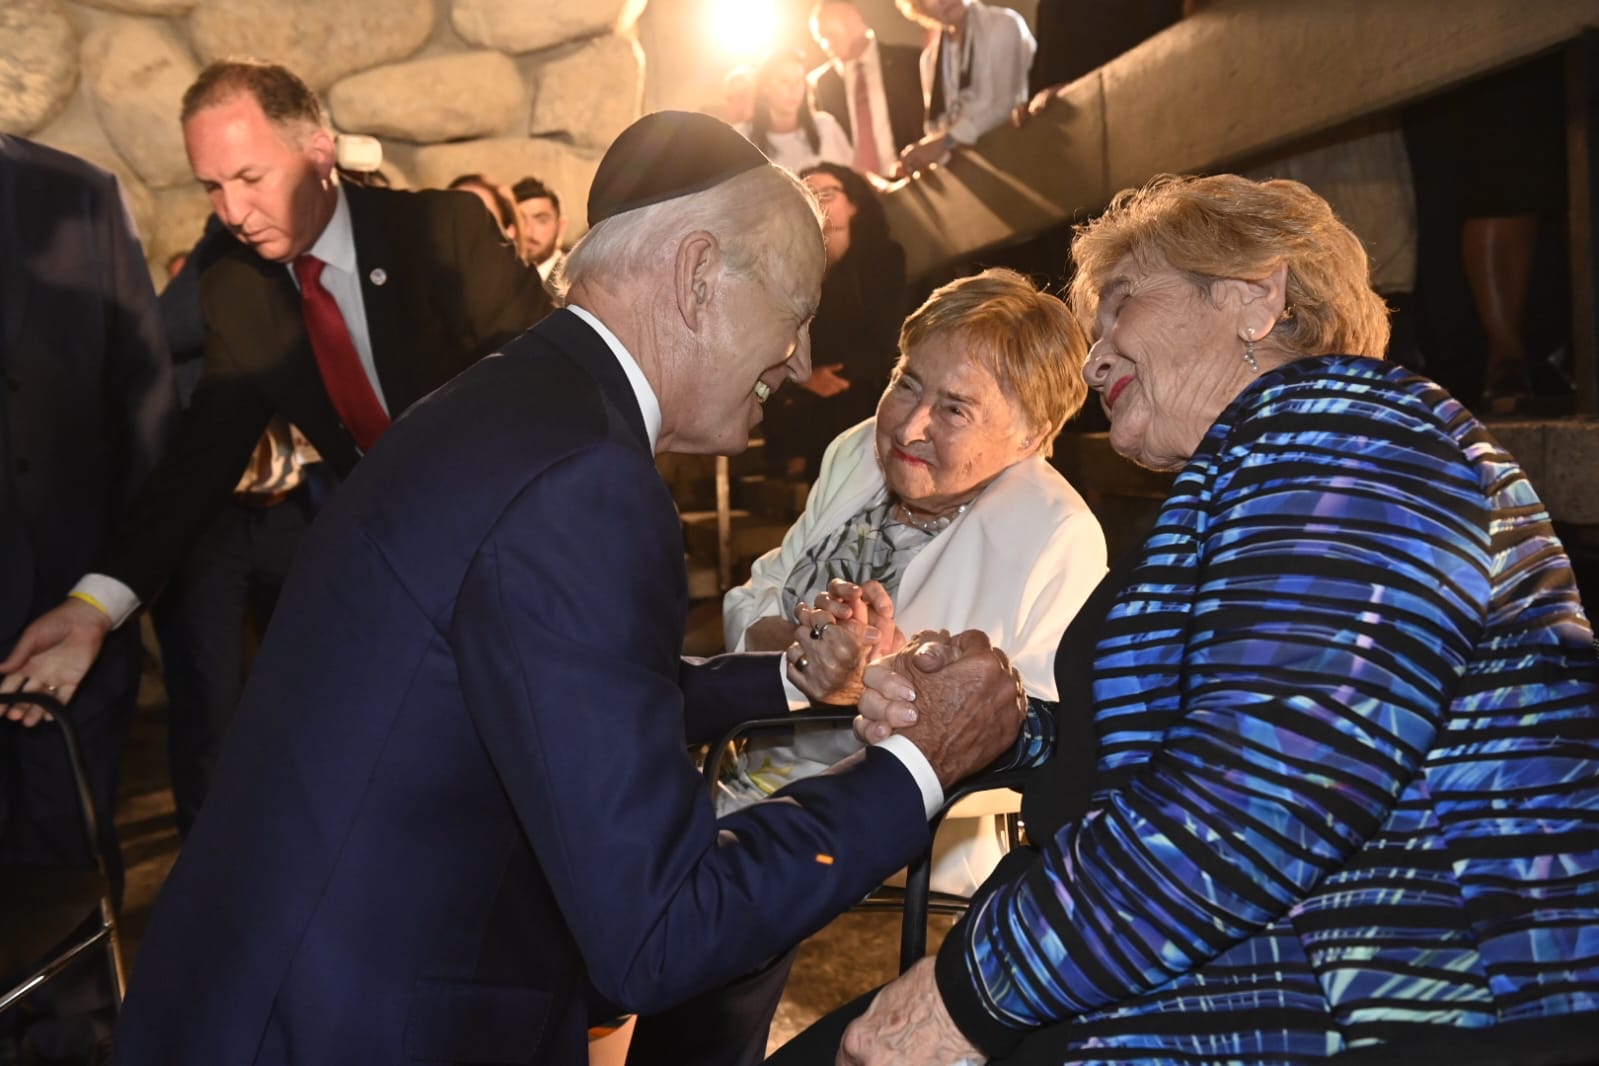 The US President Joe Biden warmly greeted and spoke to Holocaust survivors Gita Cycowicz (center) and Rena Quint